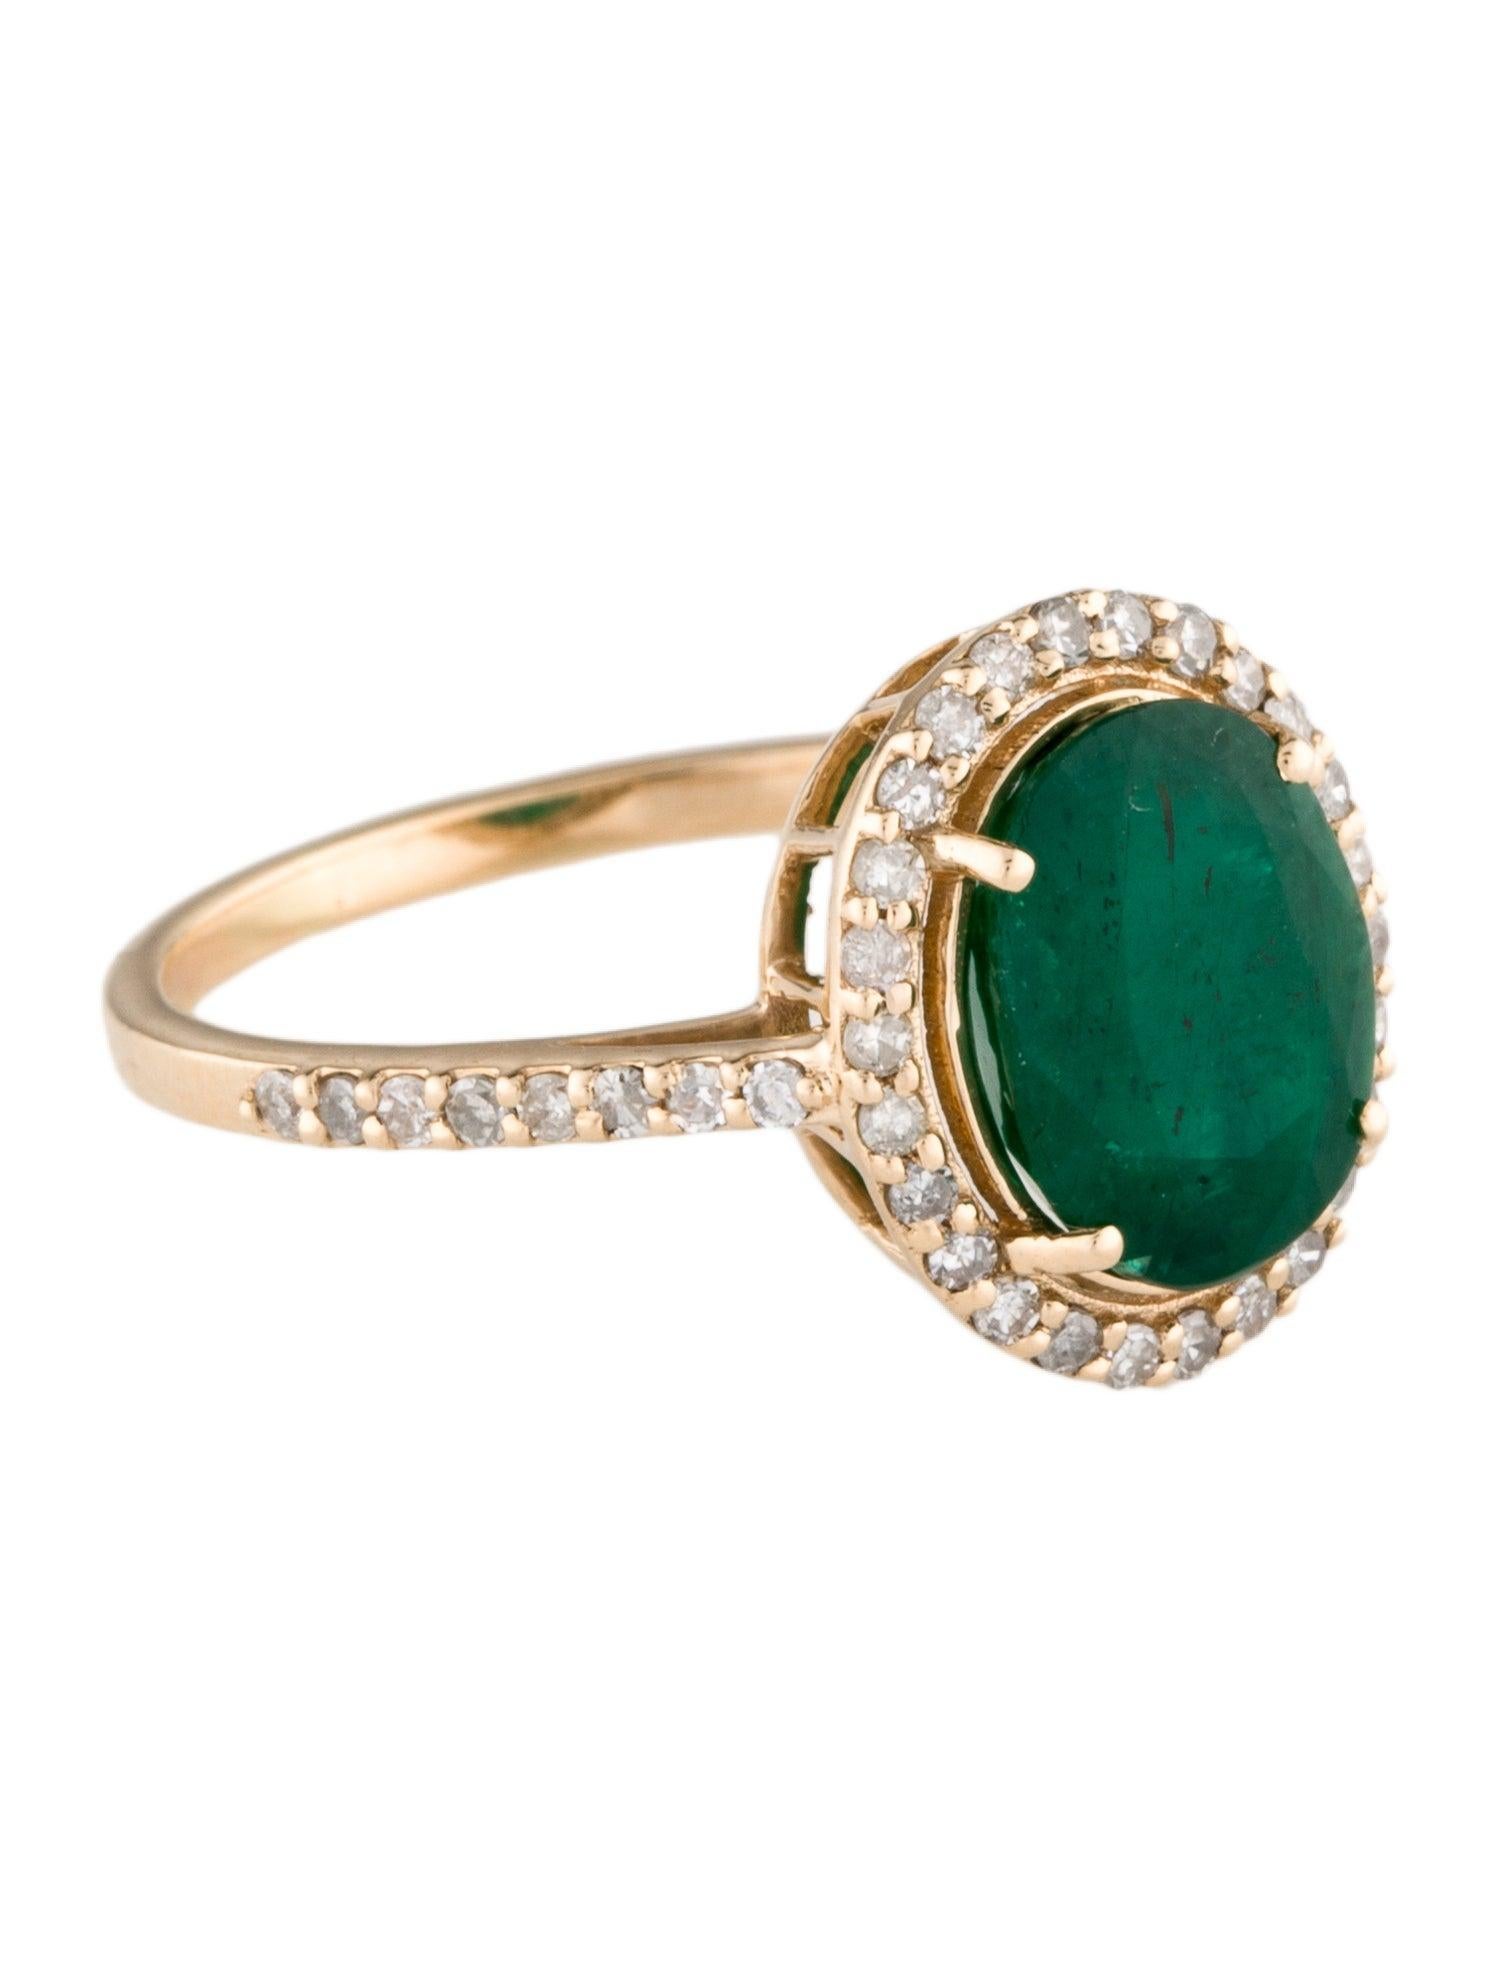 Unveil the epitome of elegance with our 14K Yellow Gold Cocktail Ring, featuring a mesmerizing 1.92 carat Oval Brilliant Emerald, encircled by 0.29 carats of near colorless, single-cut diamonds. This size 7 ring combines the vibrant allure of the